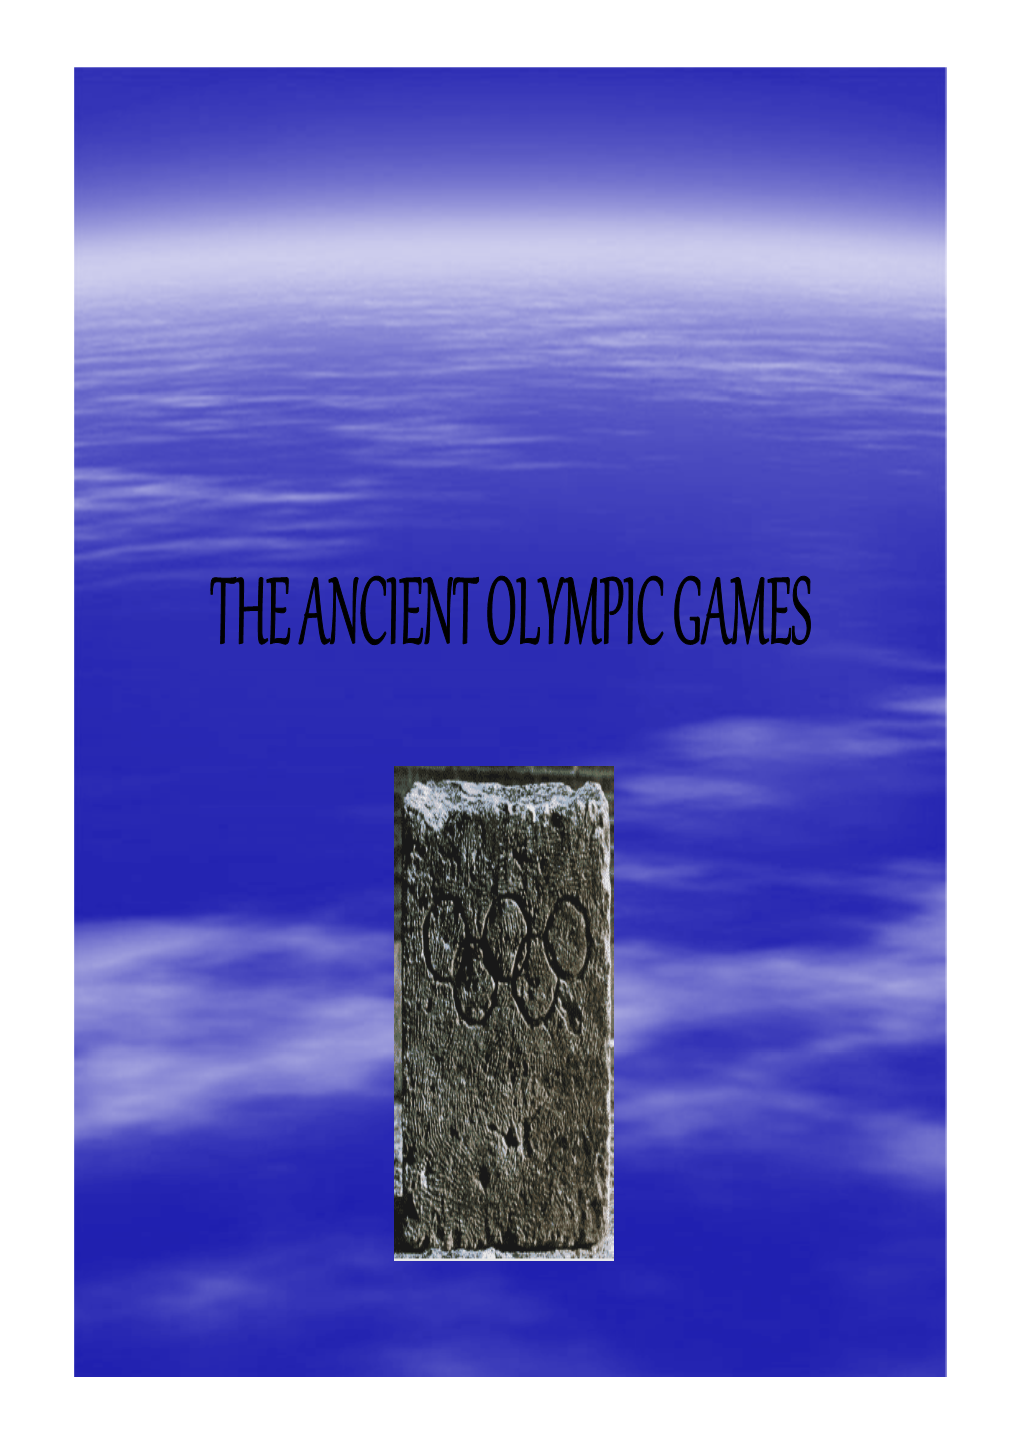 The Ancient Olympic Games Origins